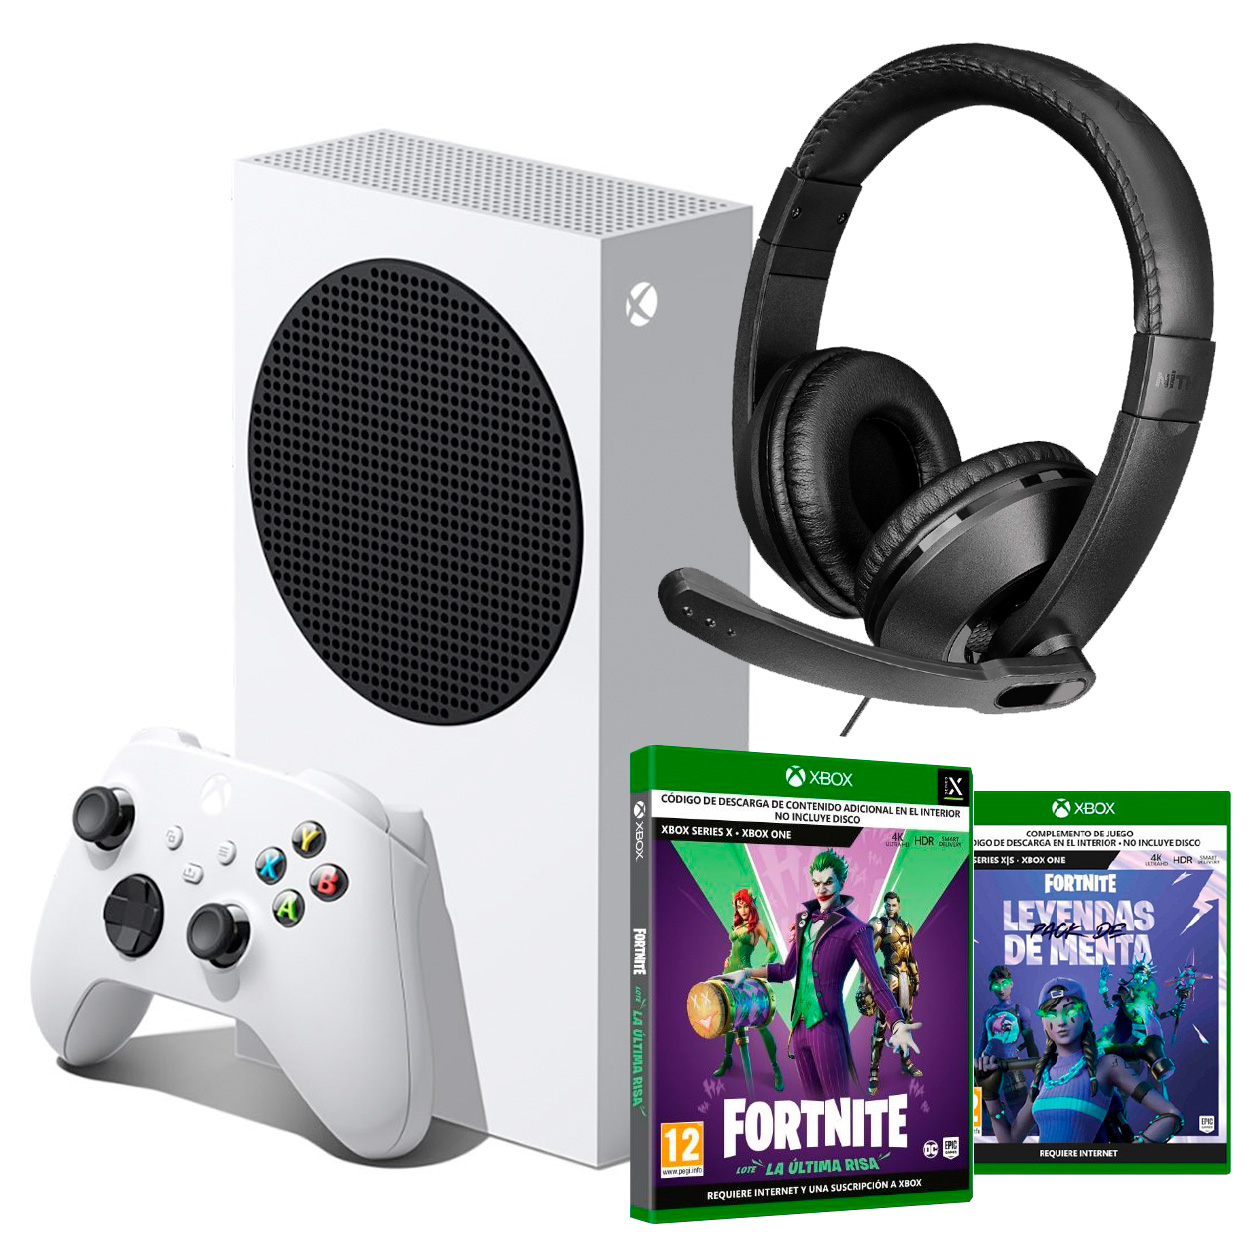 How to Get Fortnite on Xbox Series X or S